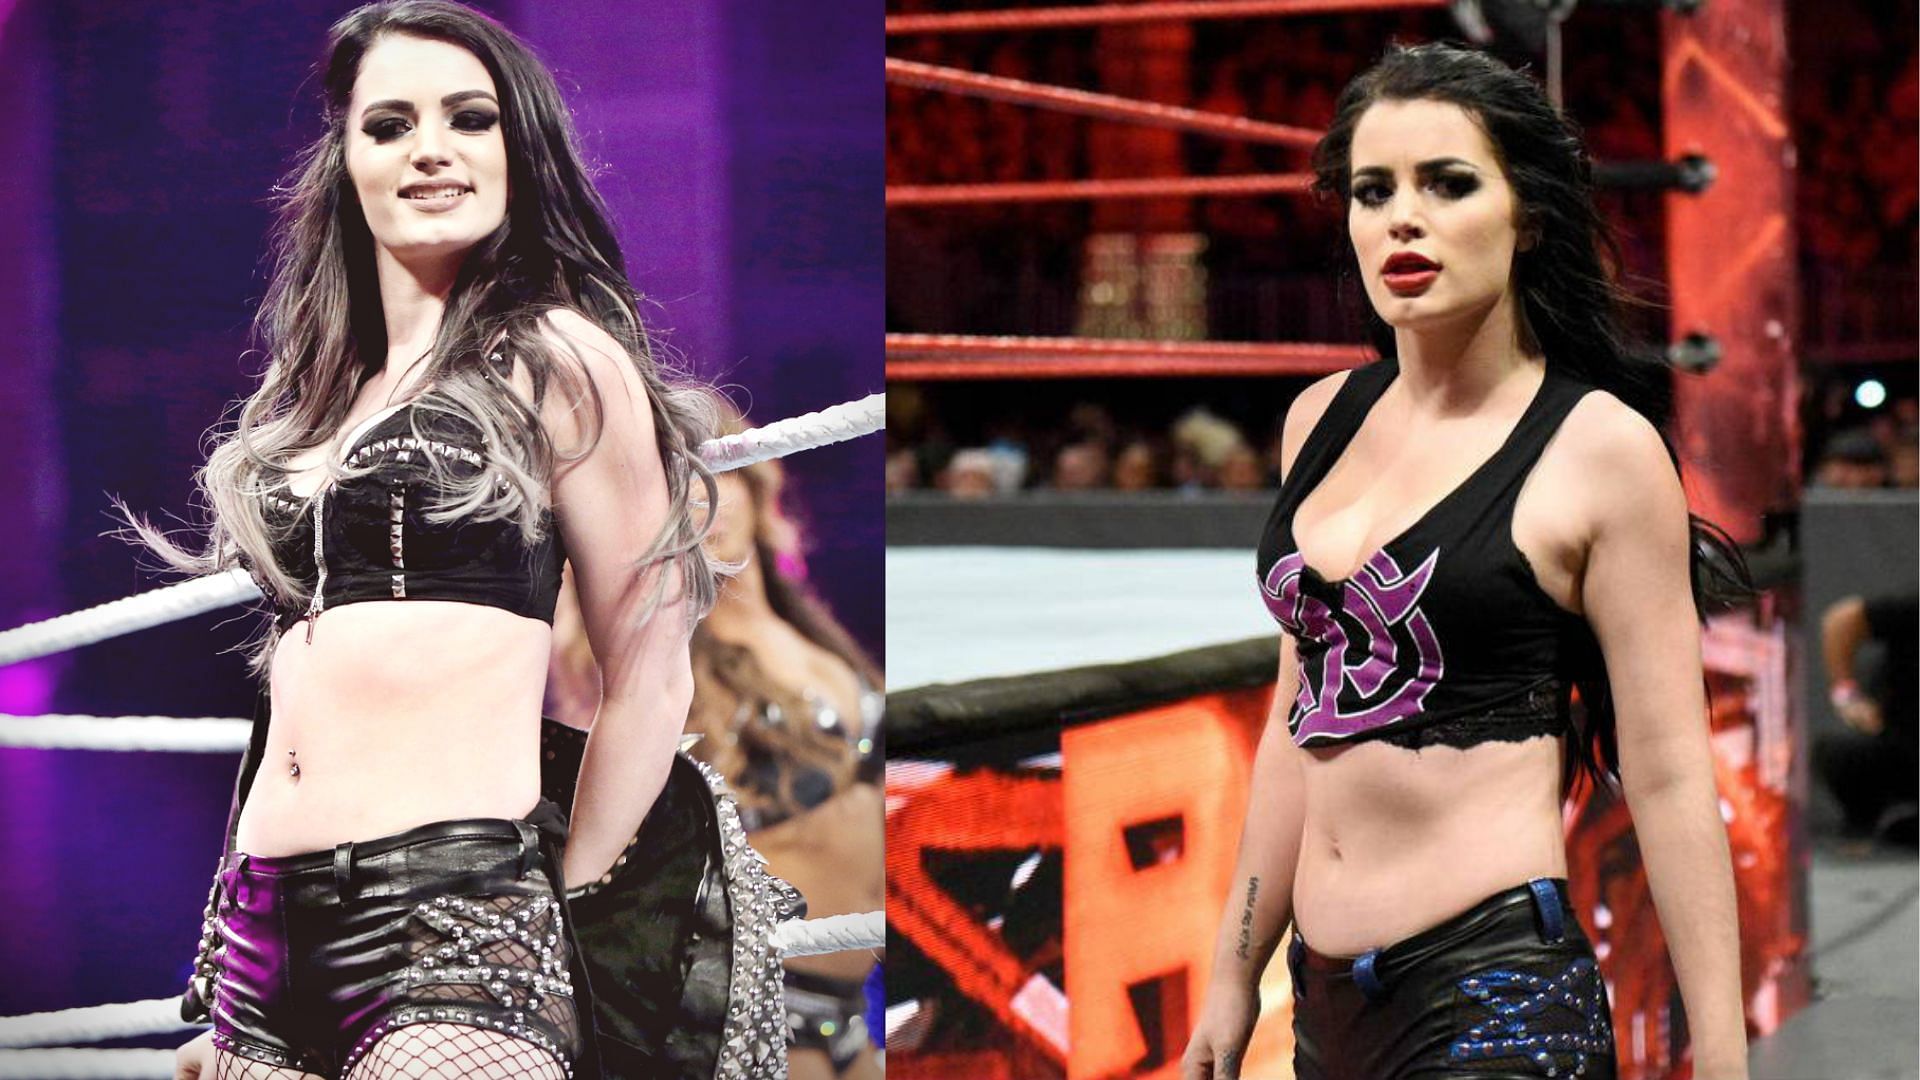 Paige had some incredible matches in WWE.